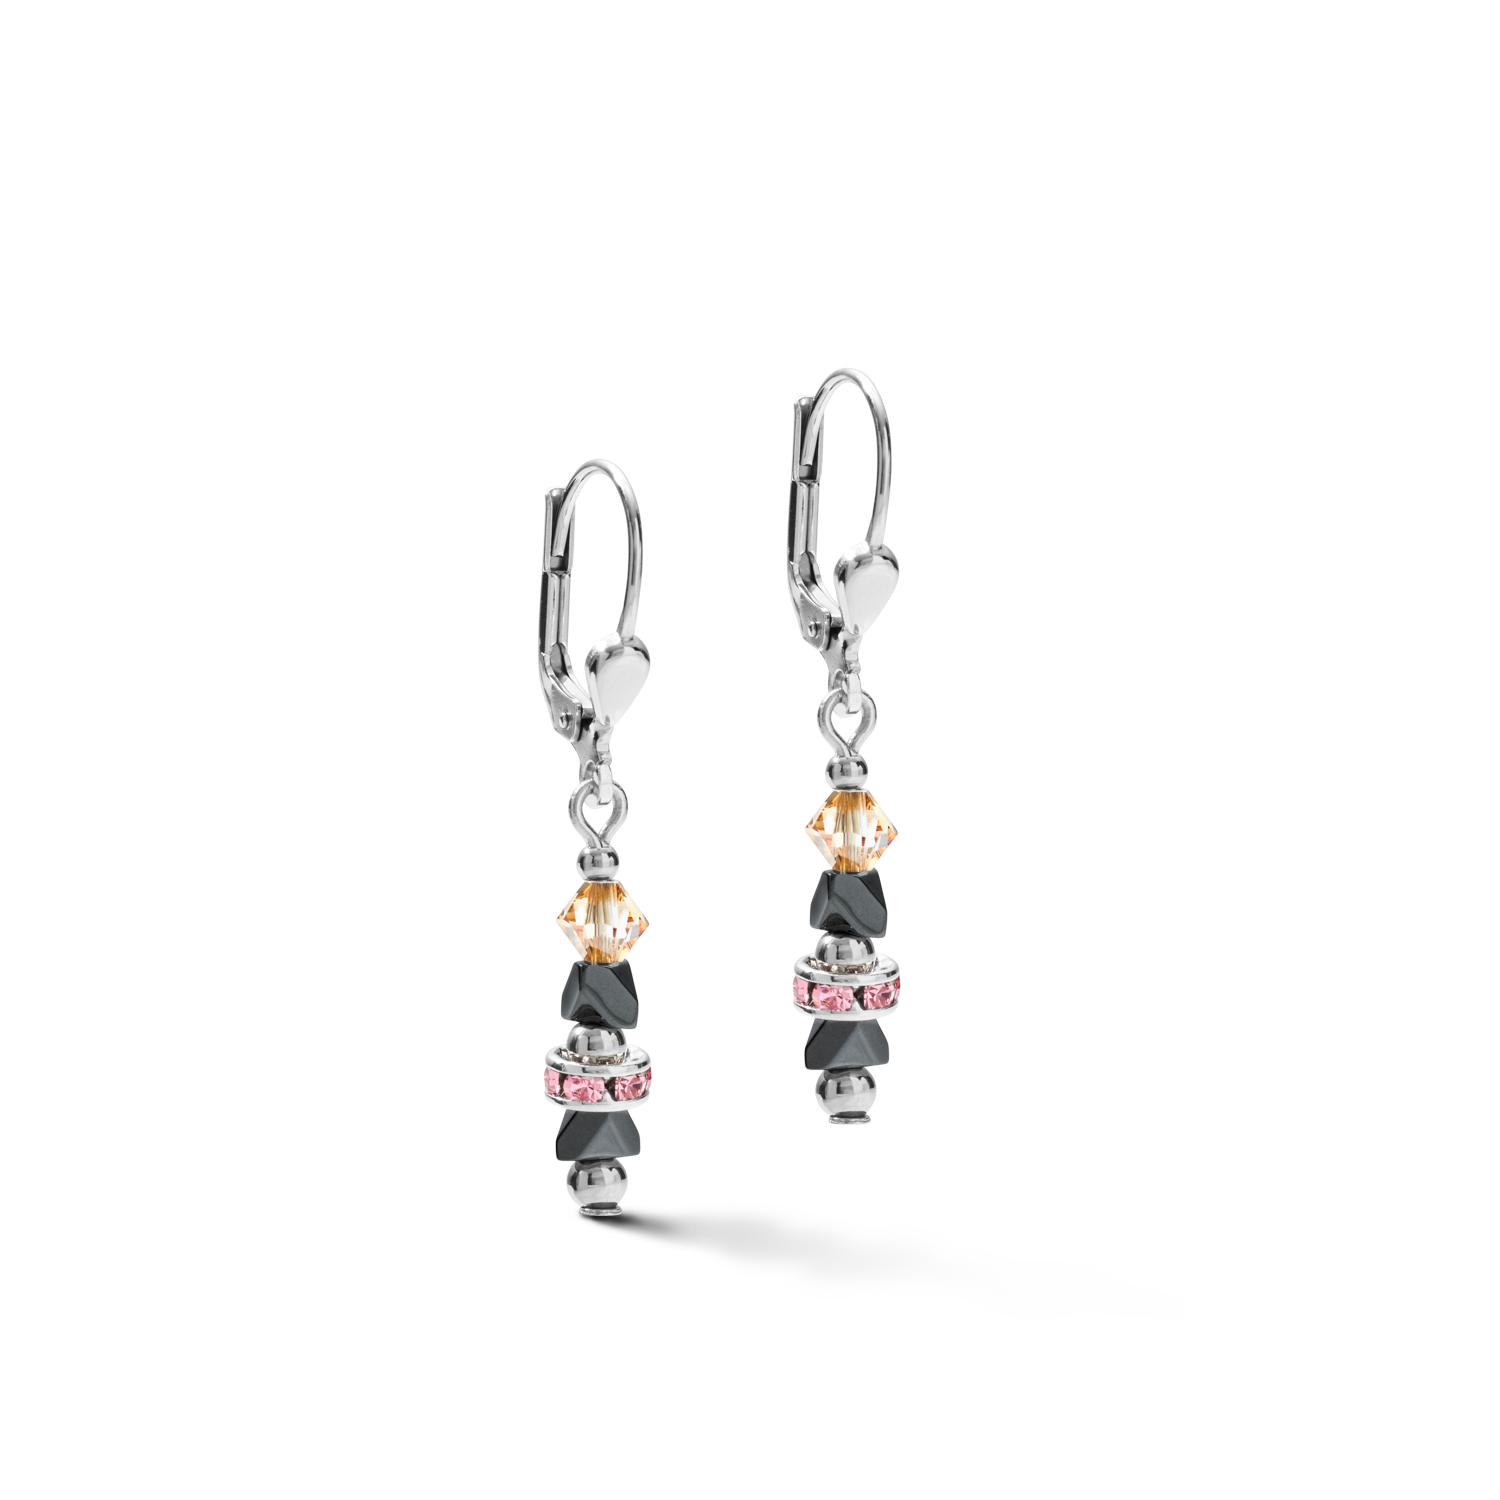 Earrings Fine & Edgy Hematite & Crystals & Stainless Steel peach-pink